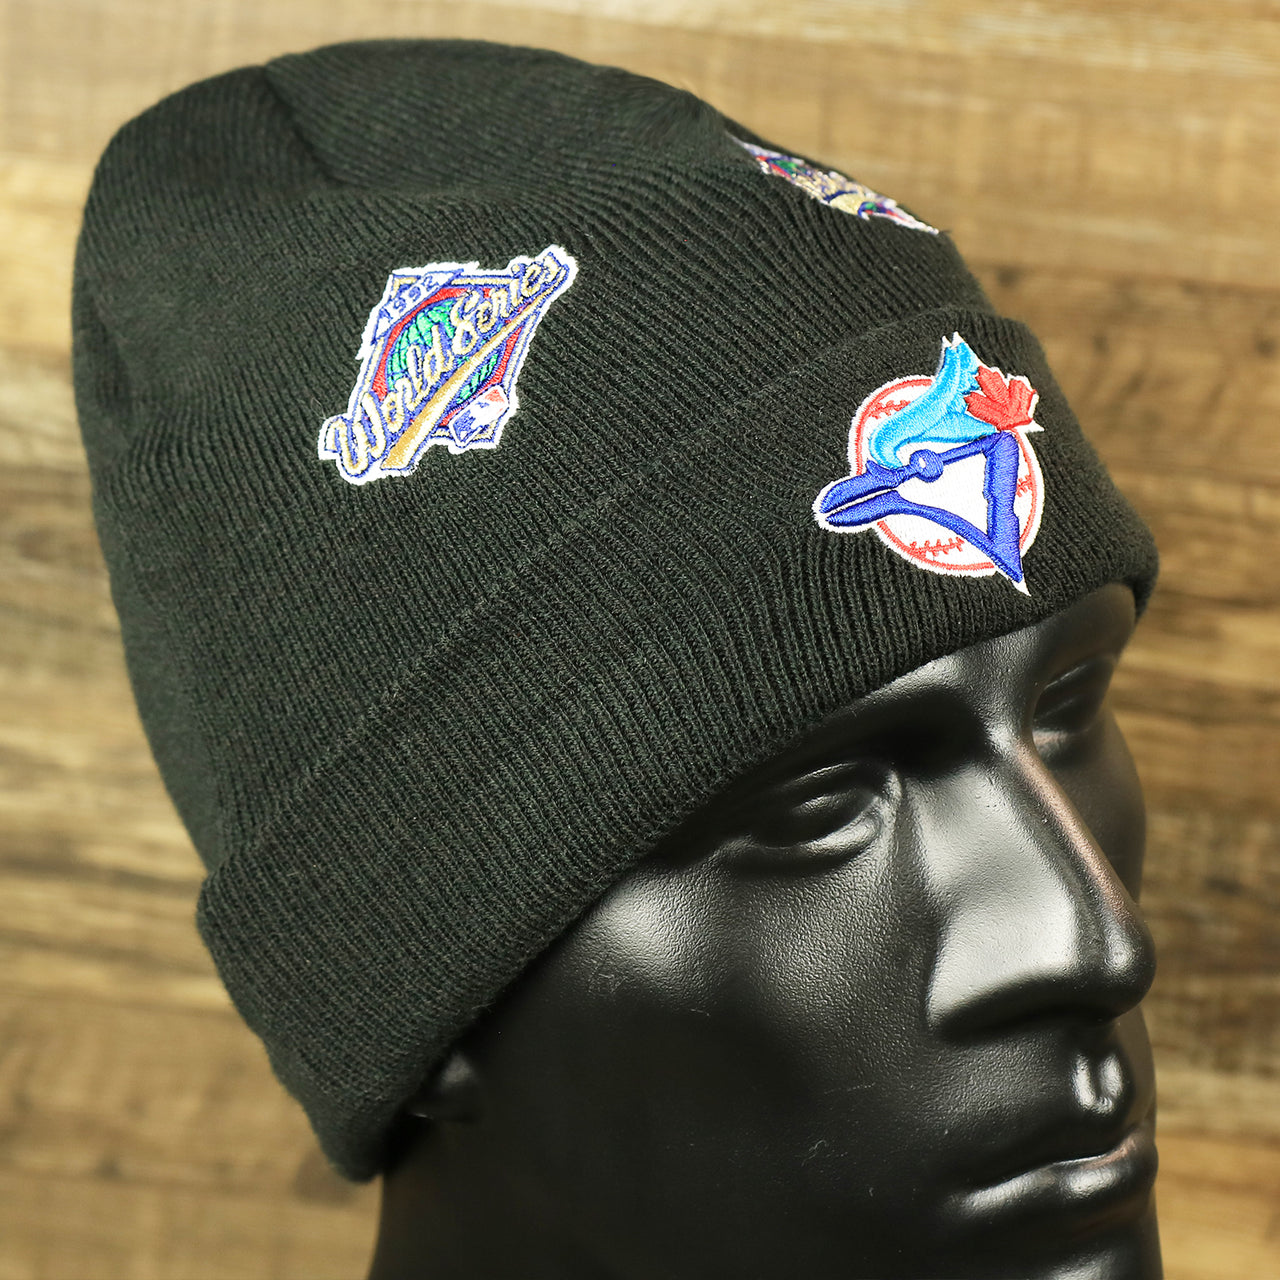 The Toronto Blue Jays All Over World Series Side Patch 2x Champion Knit Cuff Beanie | New Era, Black